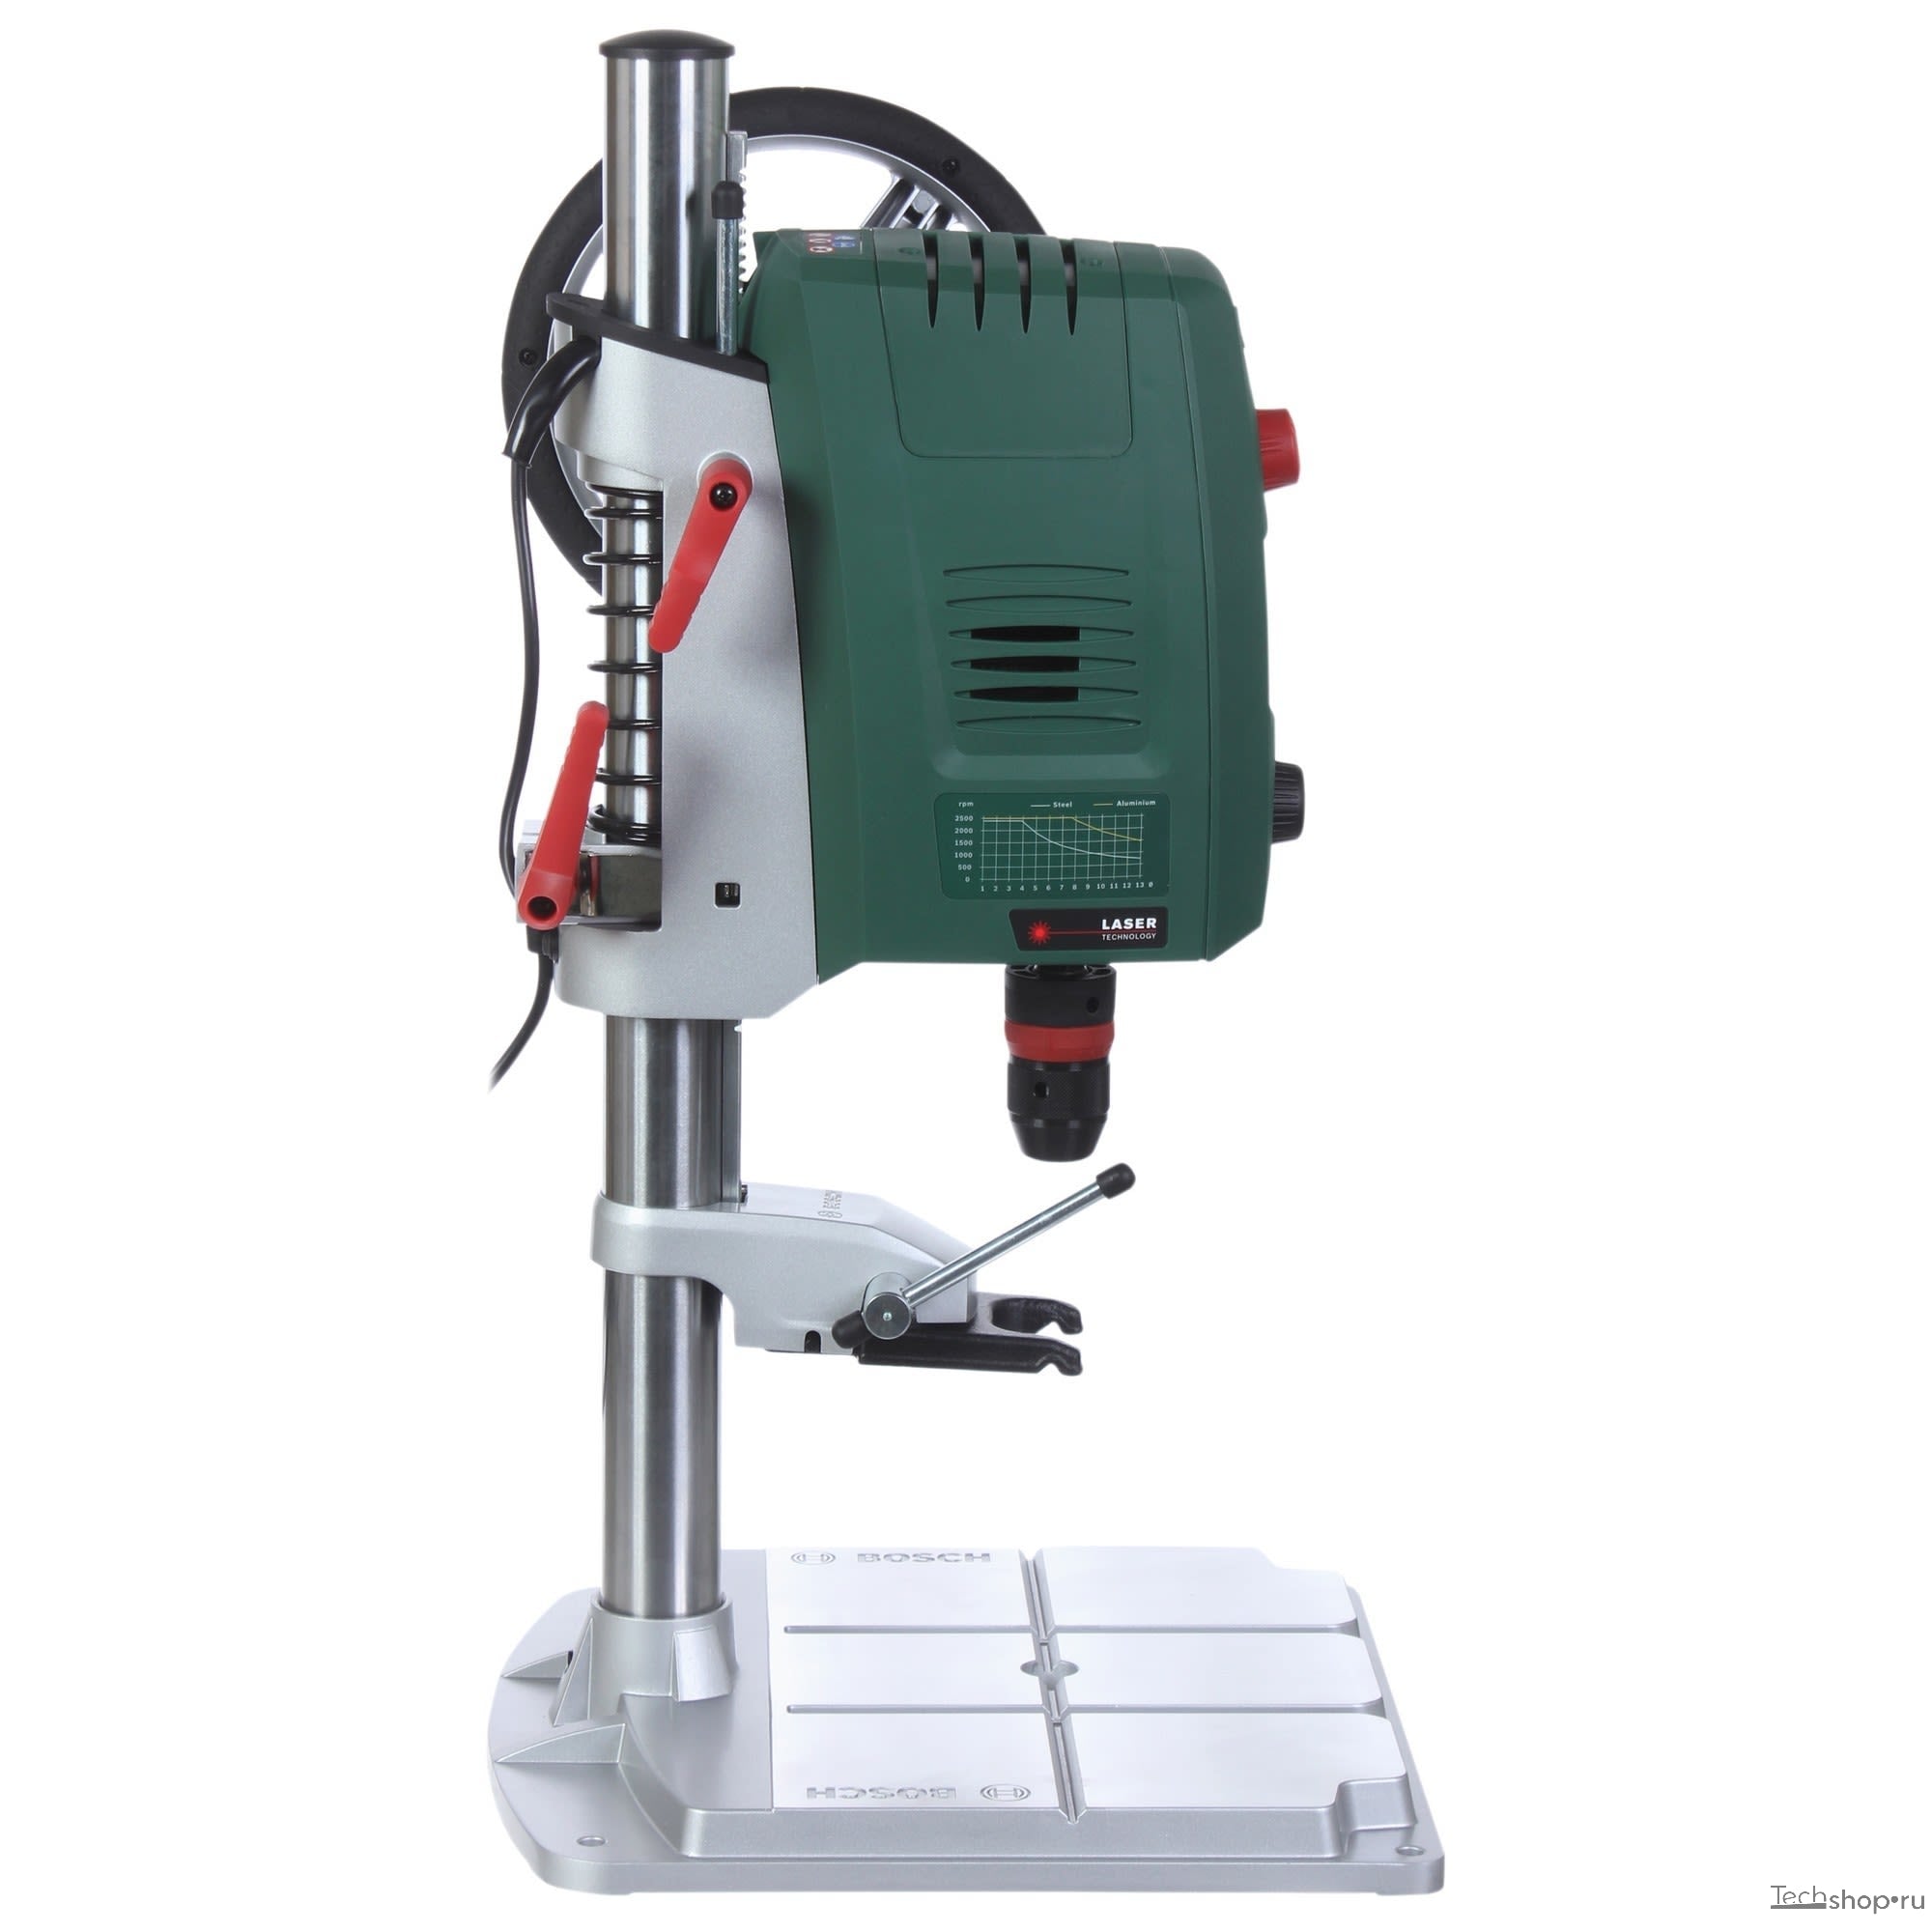 Bosch PBD 40 Electronic Drill Press 0603B07000 Power Tool Services